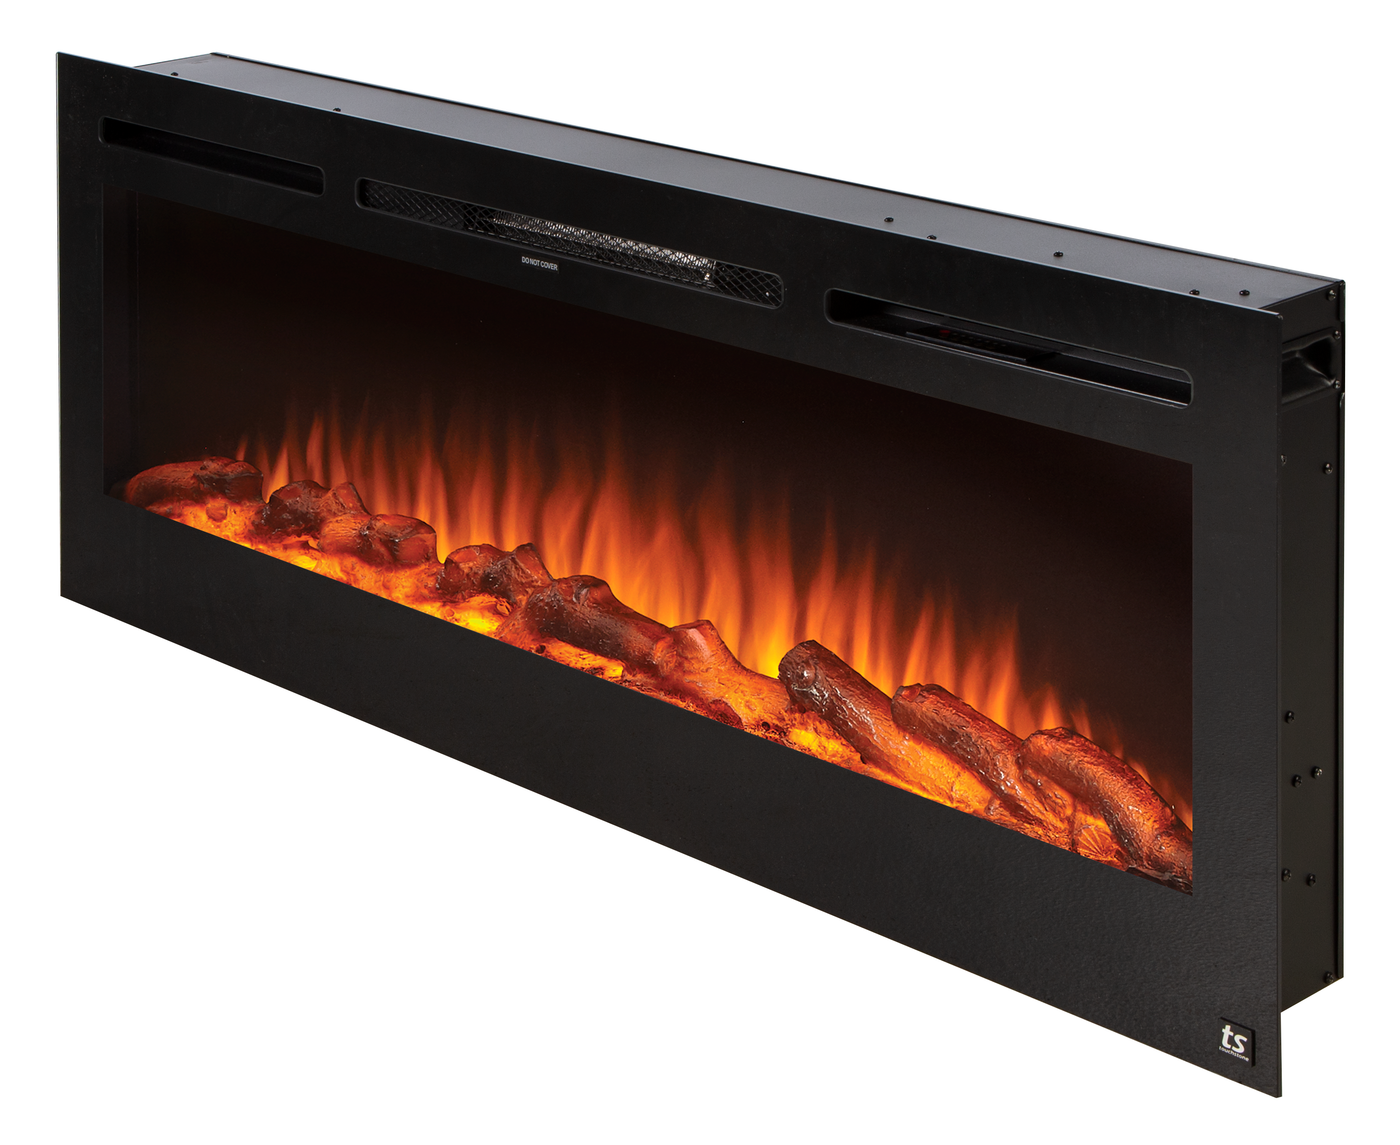 80004 50 In. Wide Sideline Wall Mounted Electric Fireplace